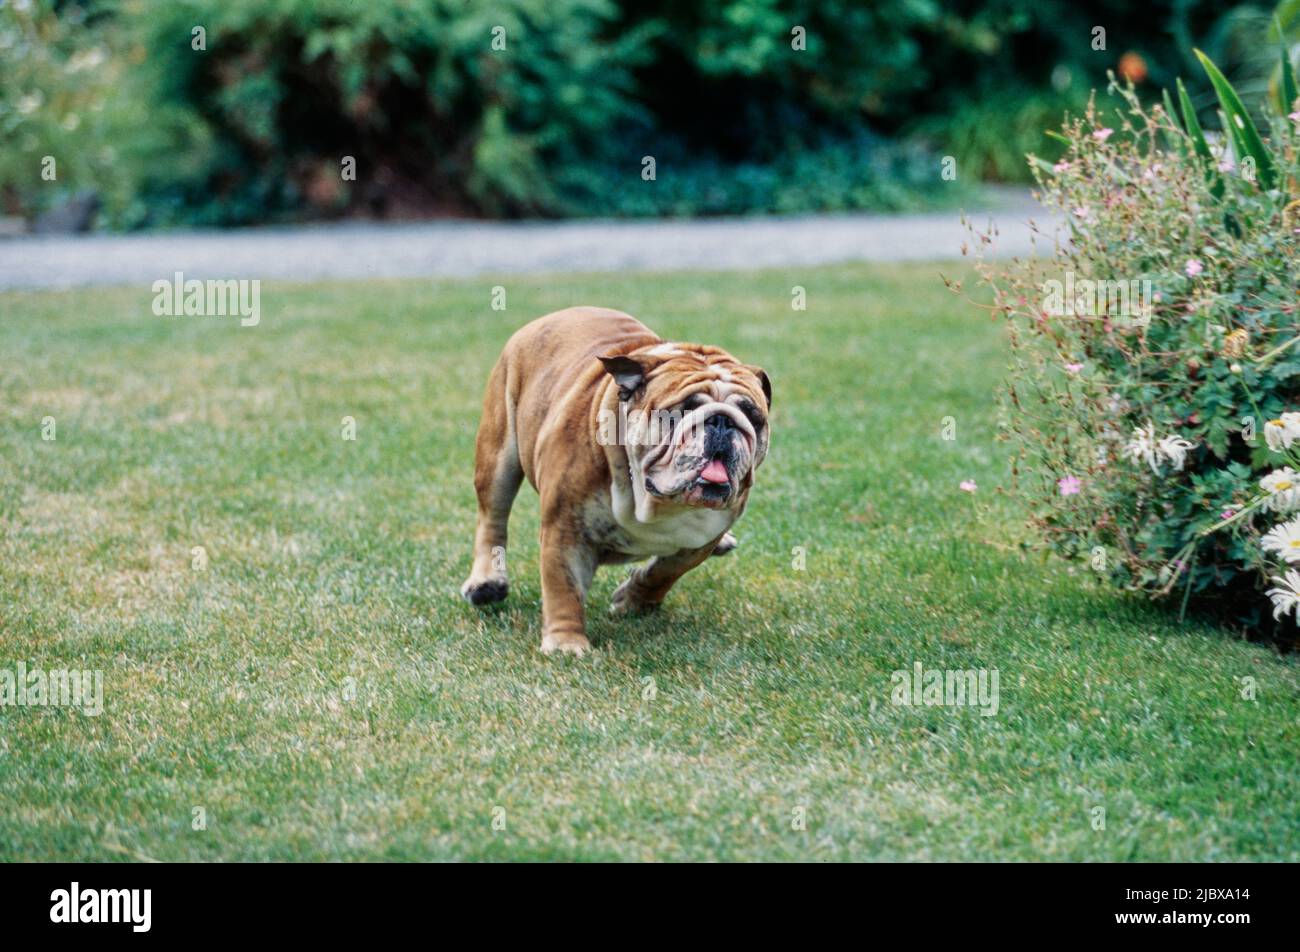 An English bulldog running through grass with white flower covered plant in the background Stock Photo